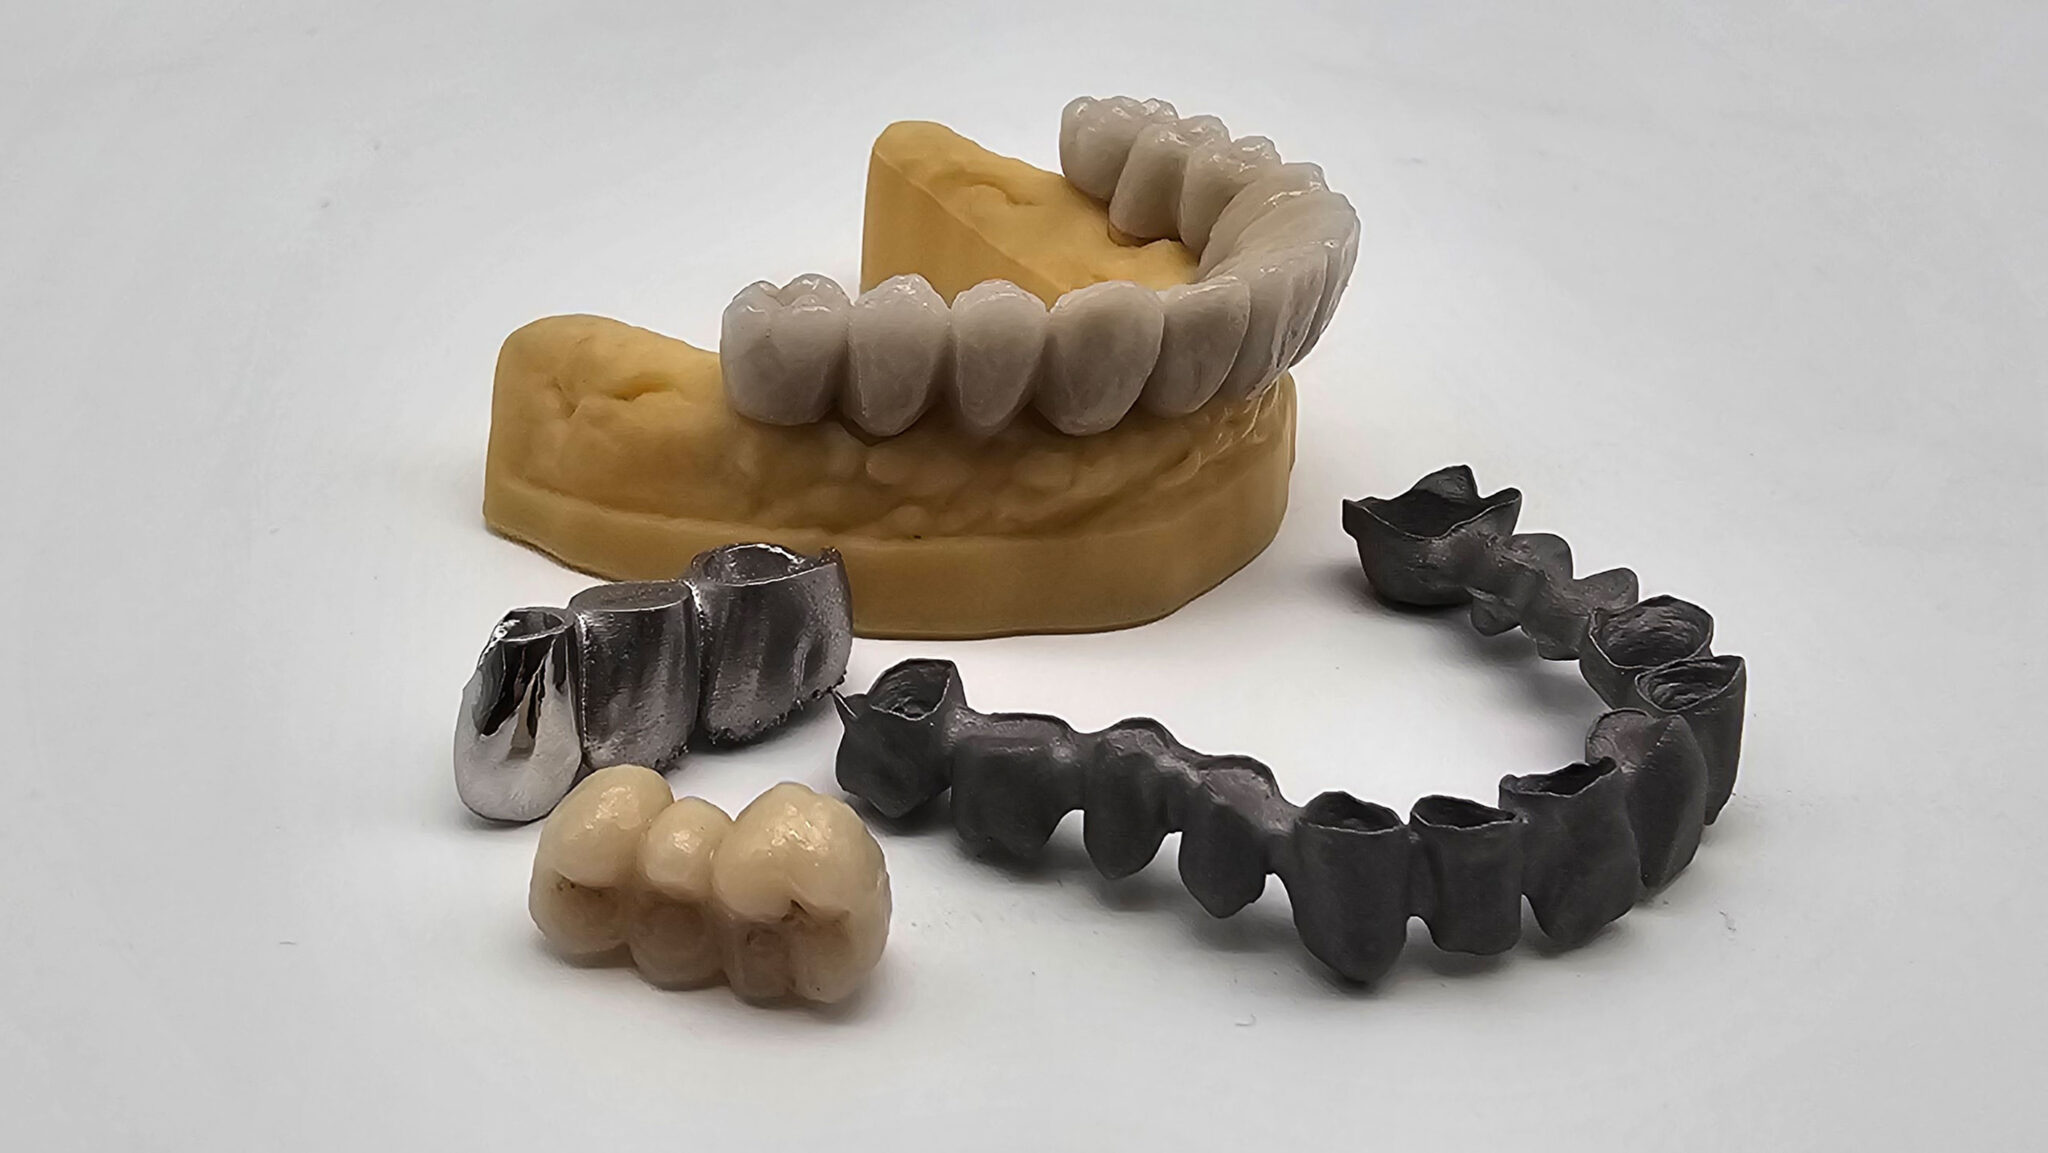 Image shows dental crowns and bridges by 2oneLab